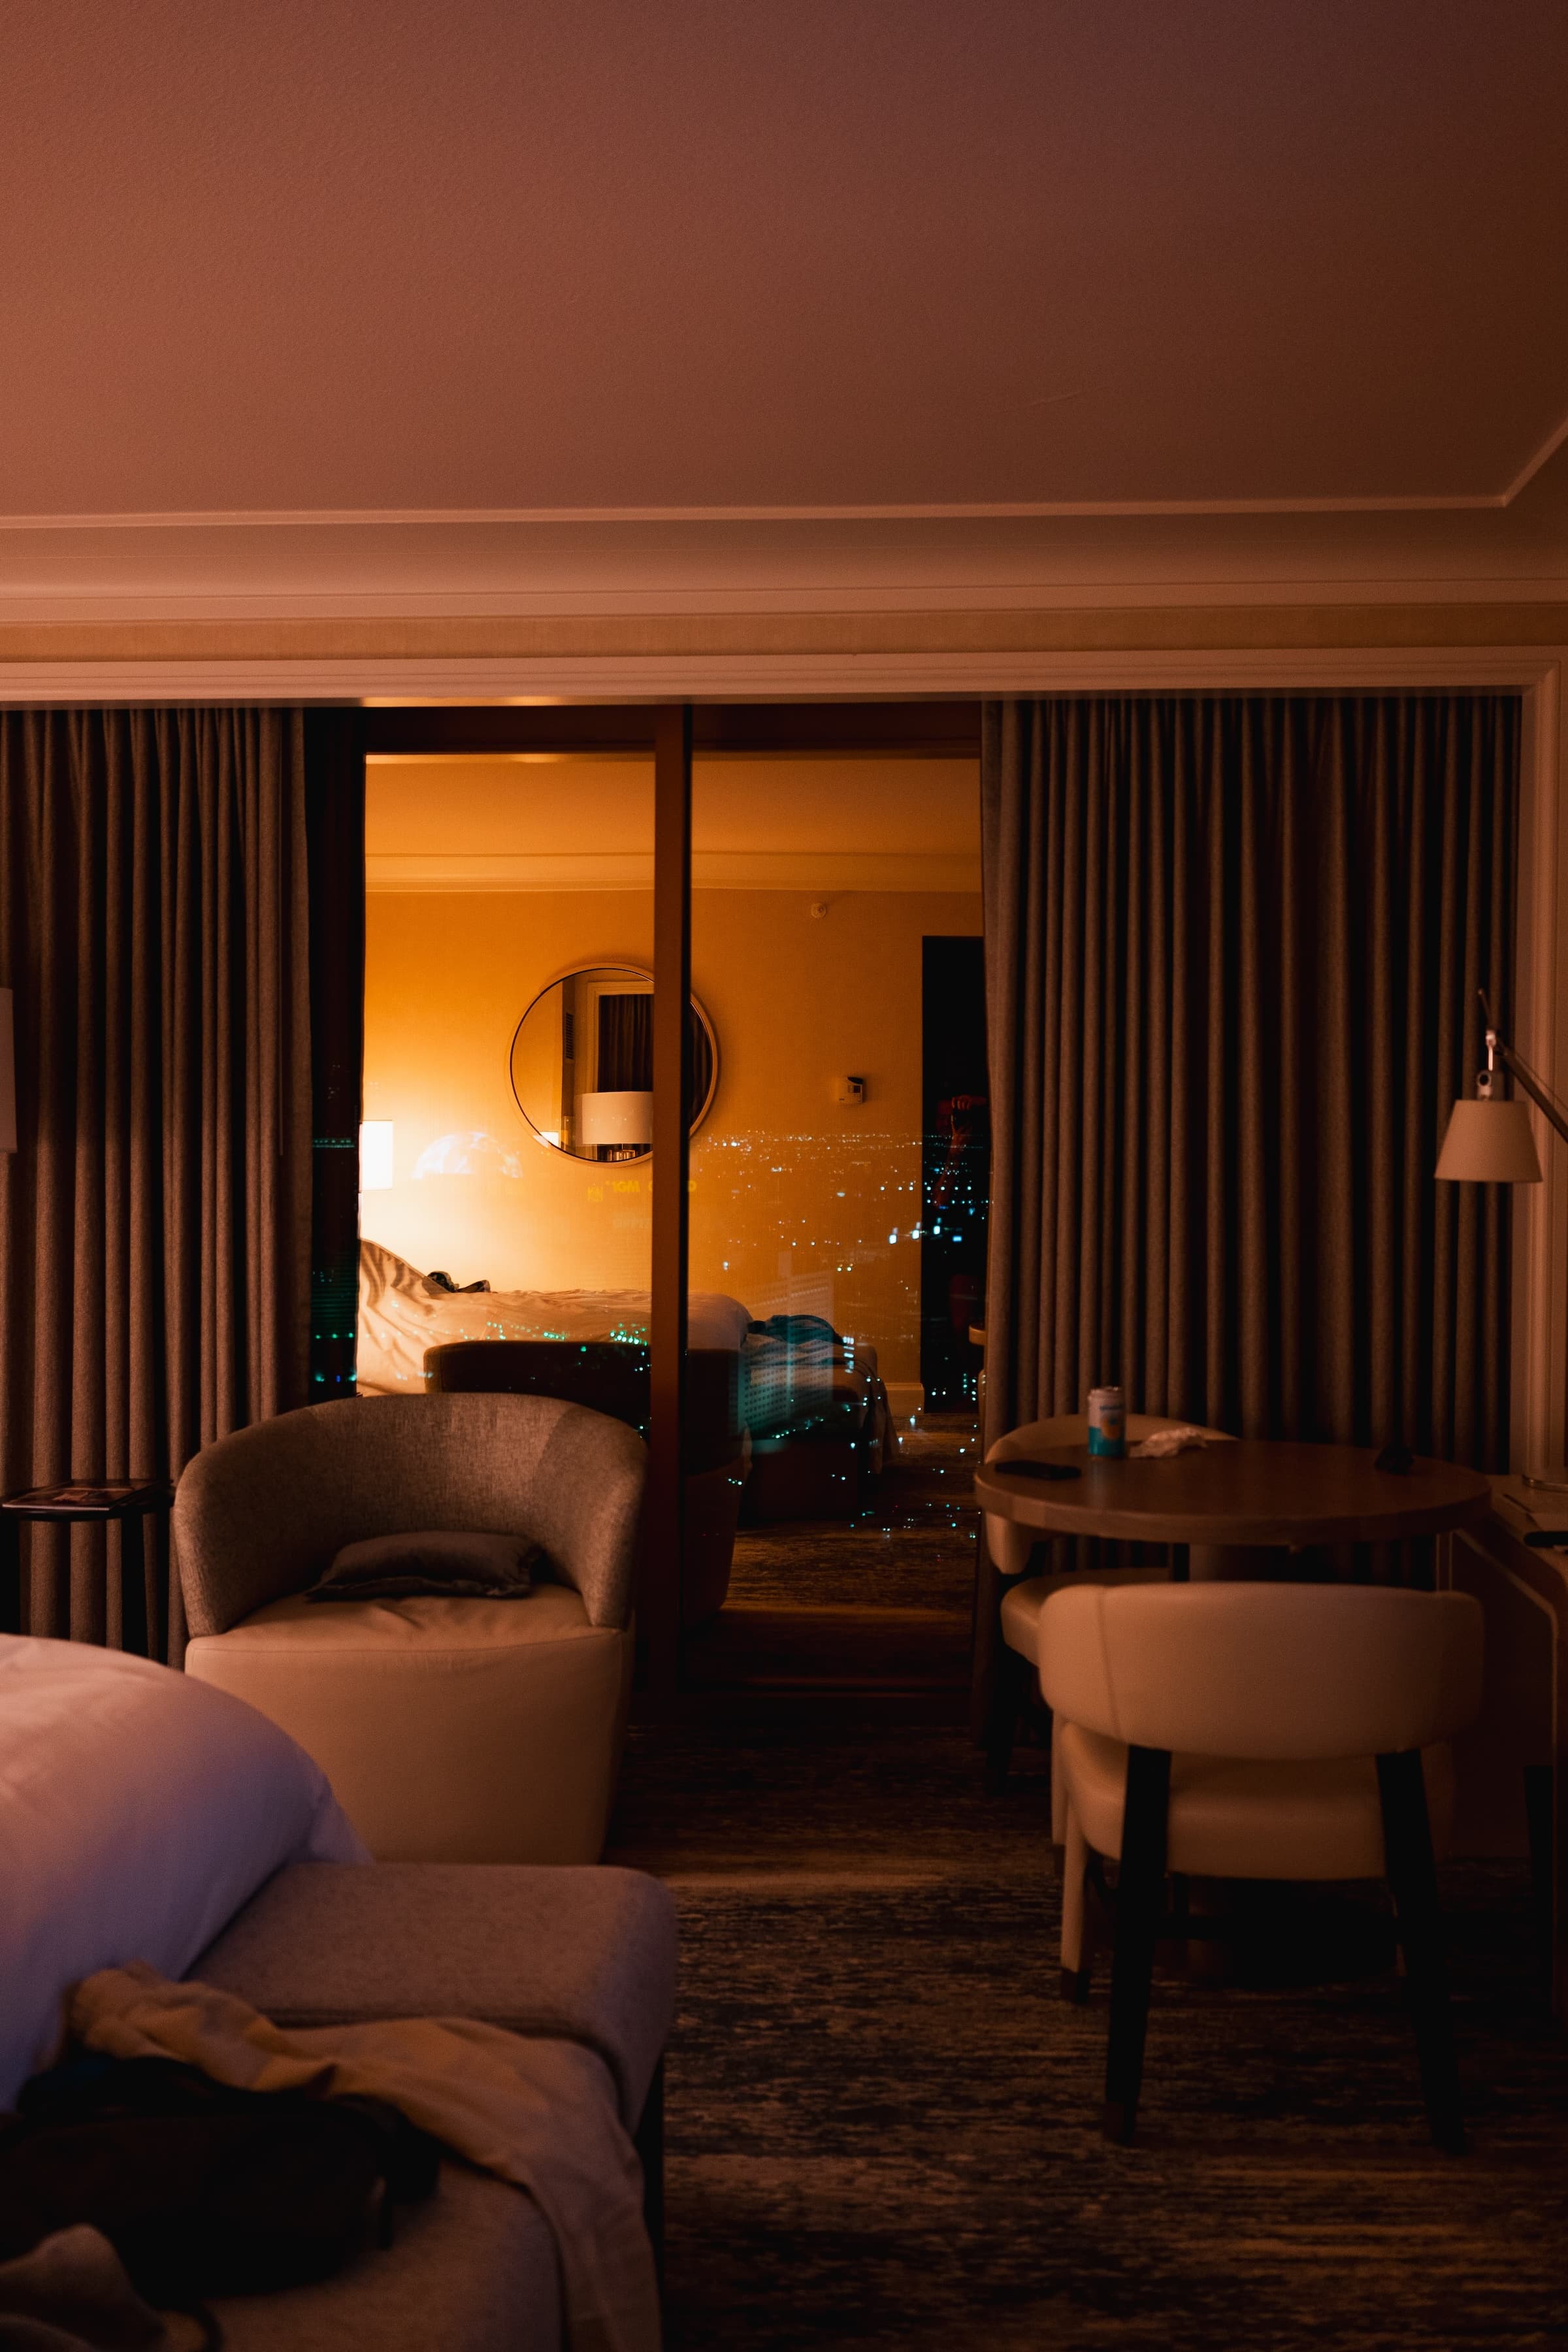 A cozy hotel room interior at night with warm lighting, comfortable furniture, and a large window offering a view of the Las Vegas city lights outside.